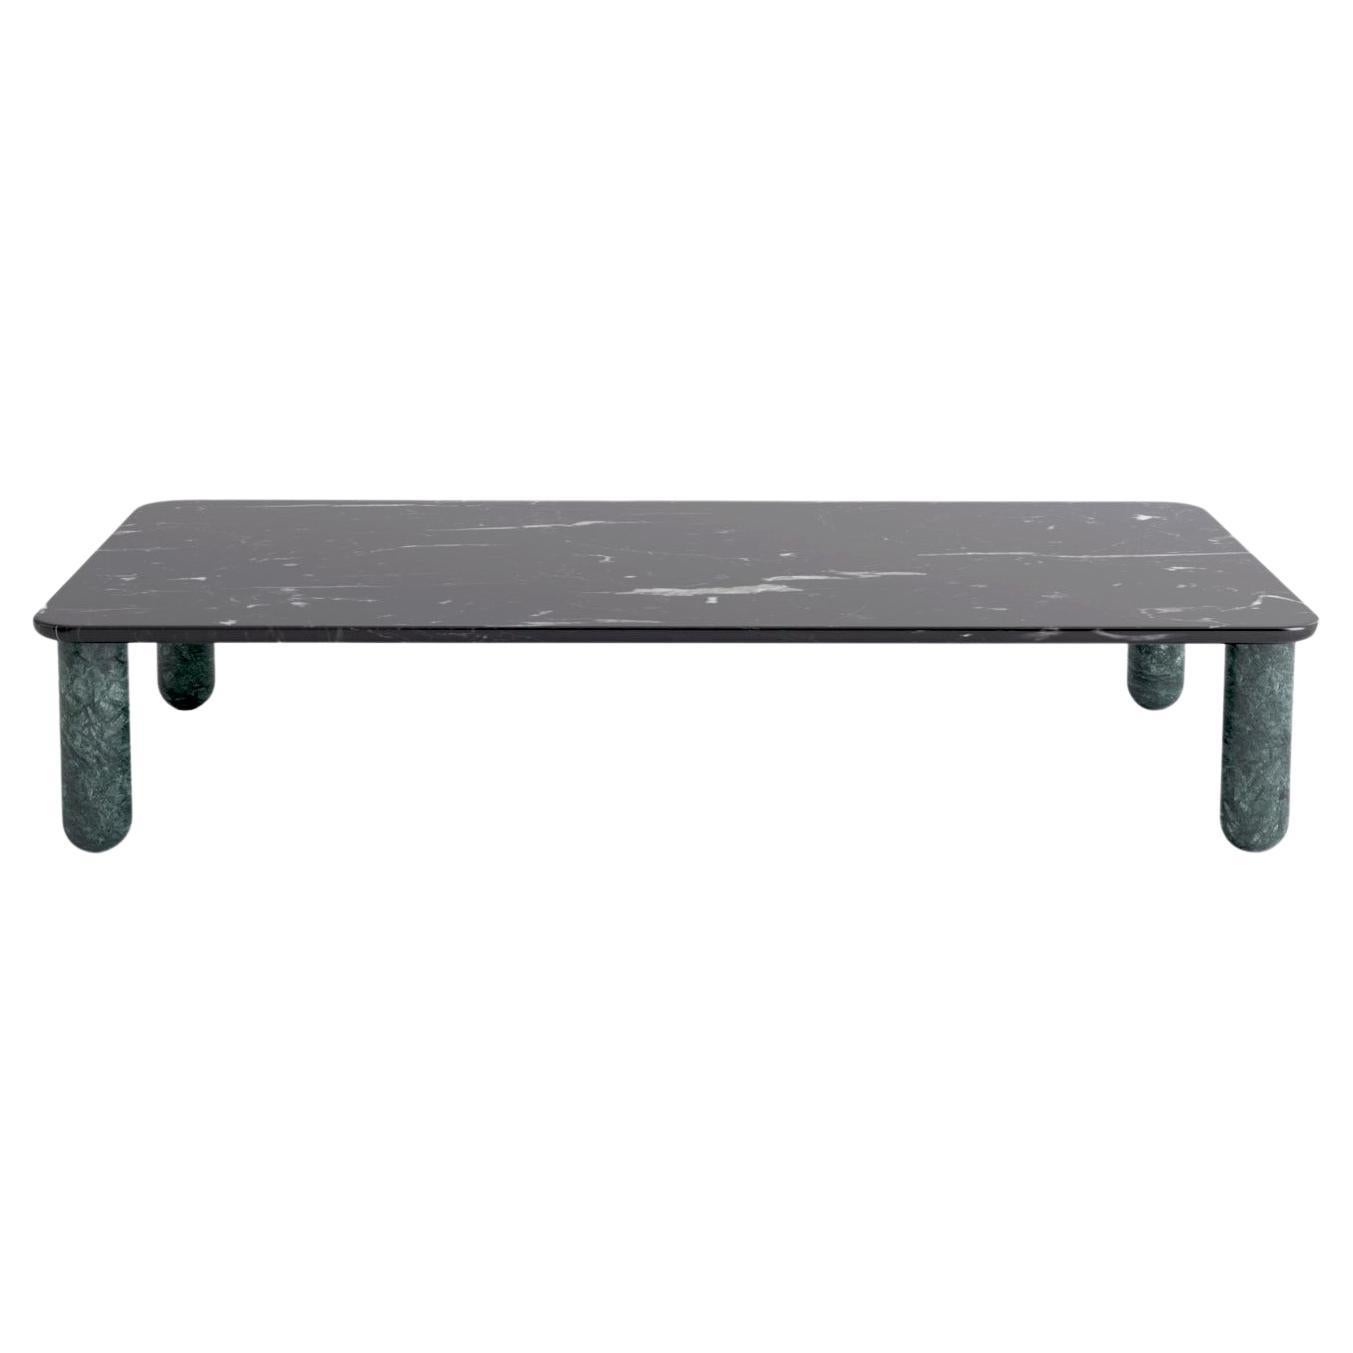 Xlarge Black and Green Marble "Sunday" Coffee Table, Jean-Baptiste Souletie